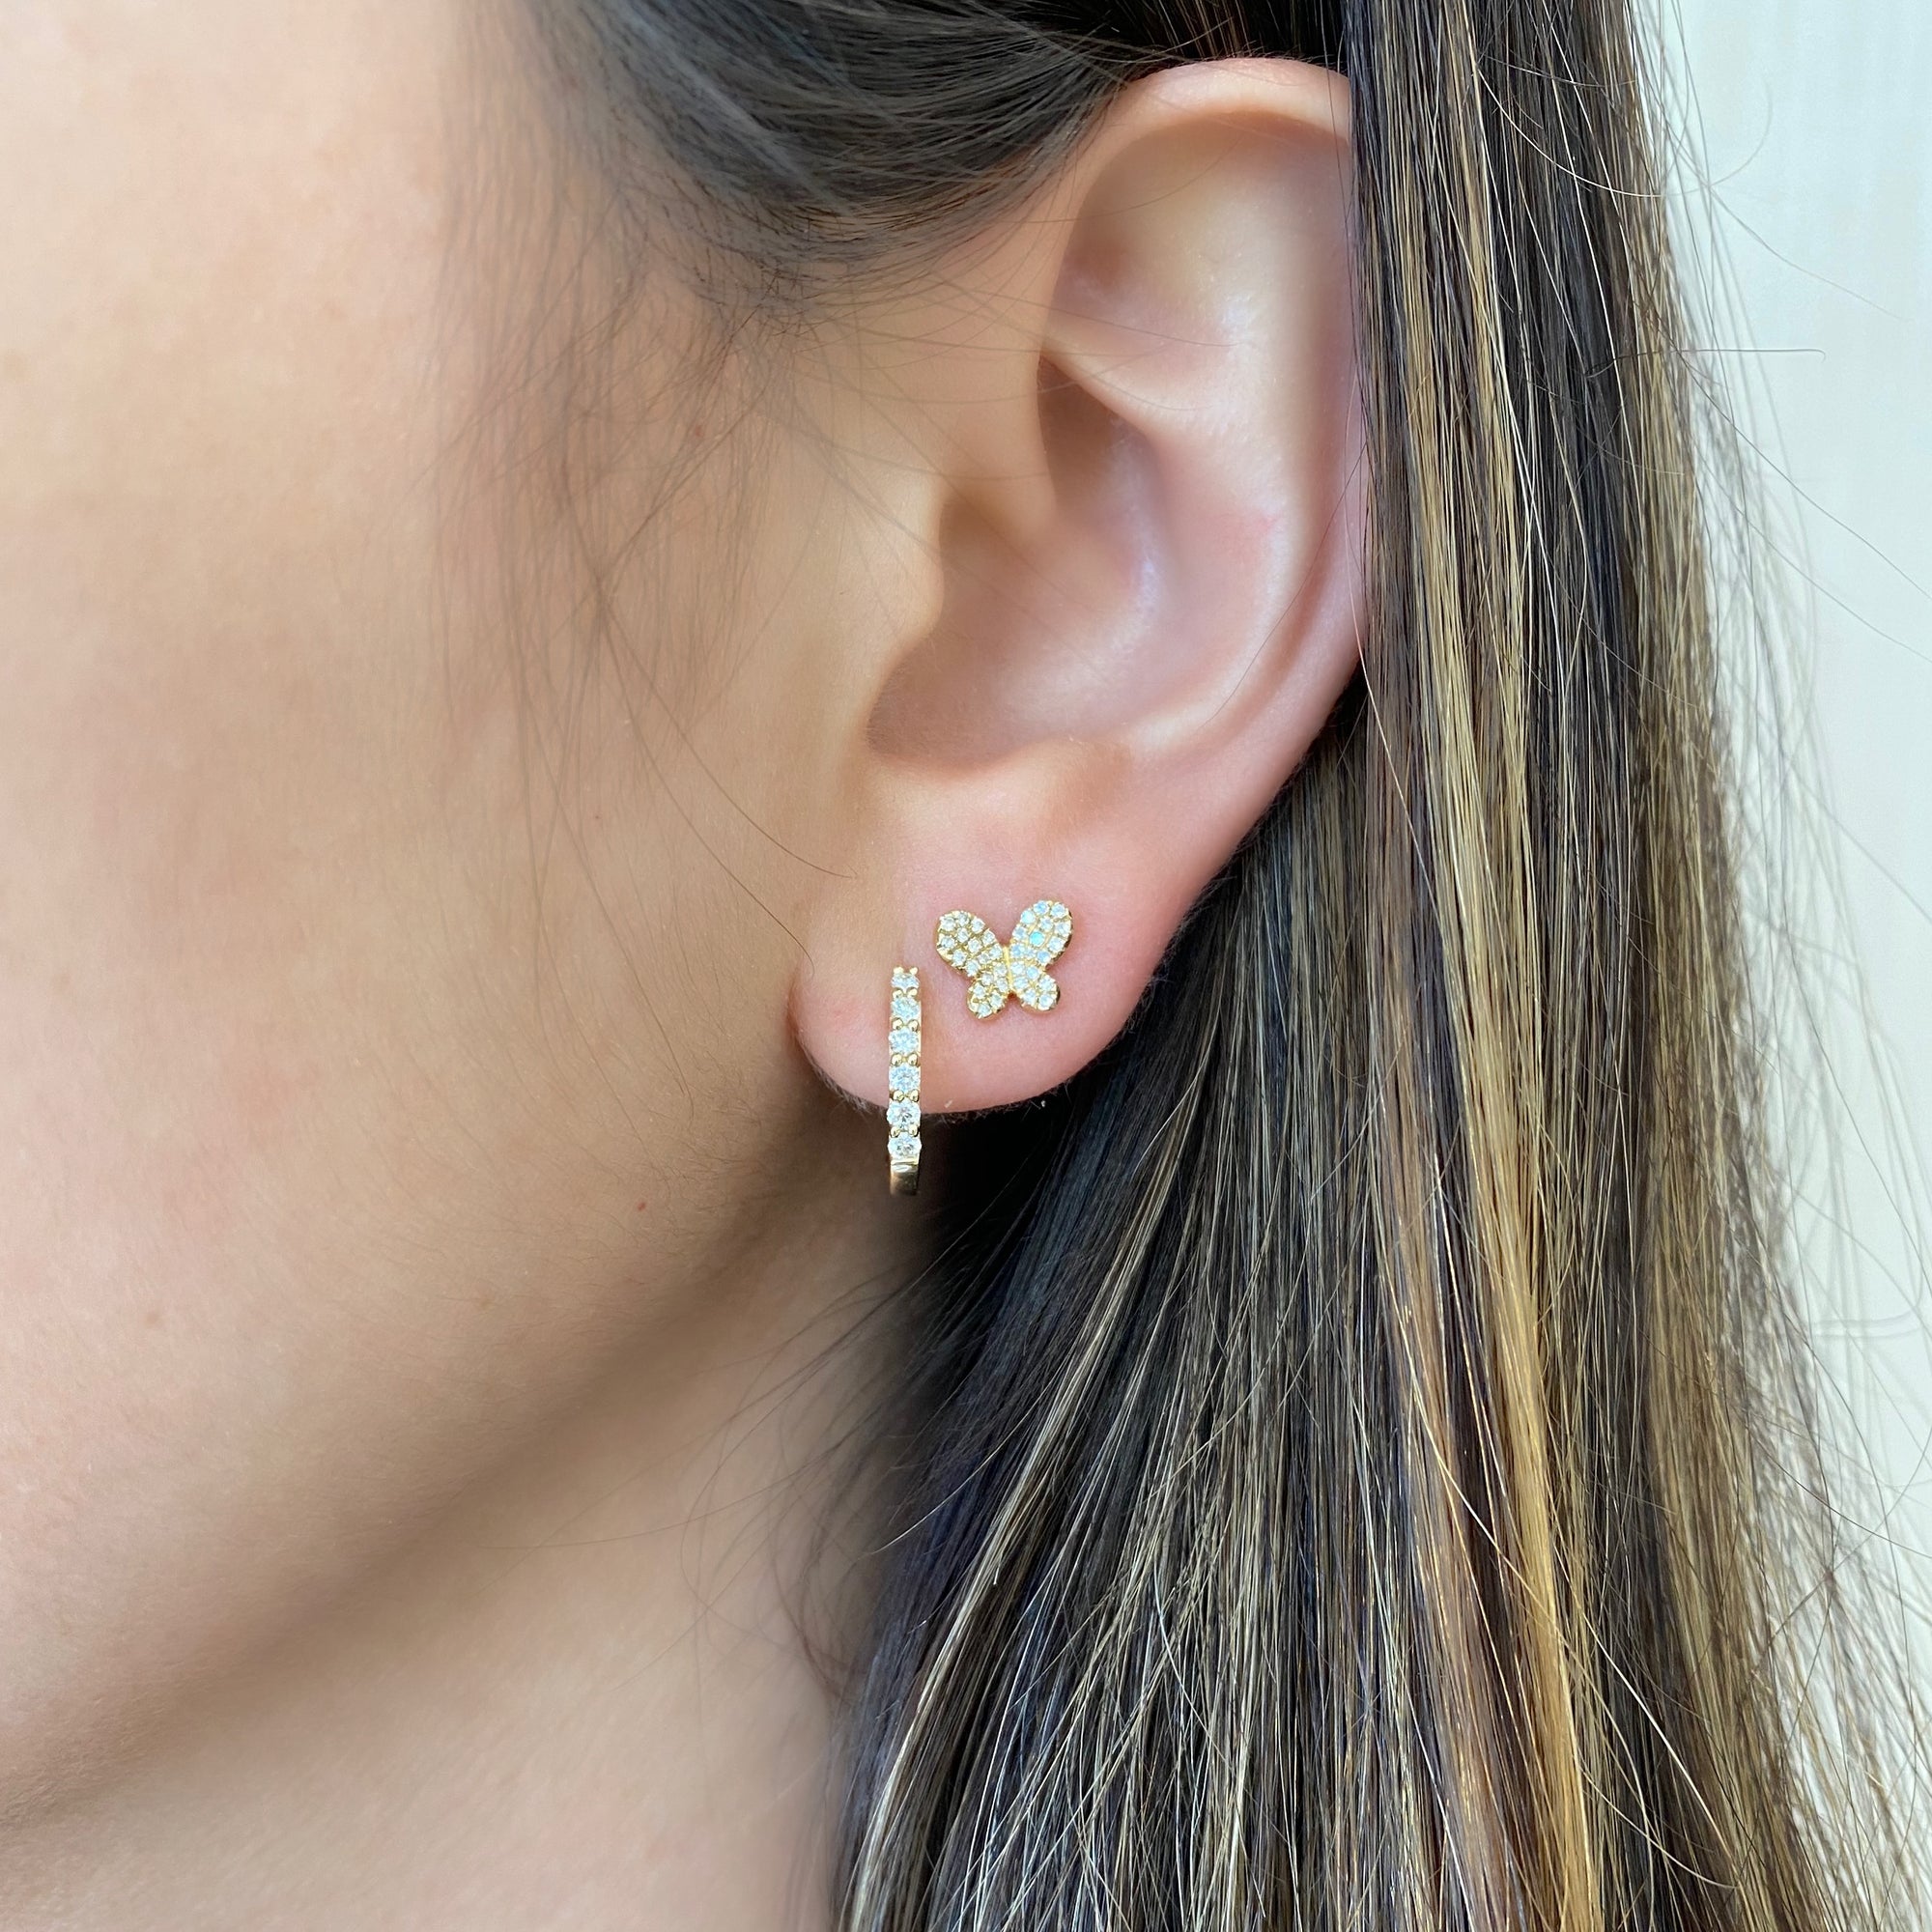 Mini Diamond Butterfly Stud Earrings -14kt yellow gold weighing 1.49 grams -68 round pave set diamonds weighing .17 carats